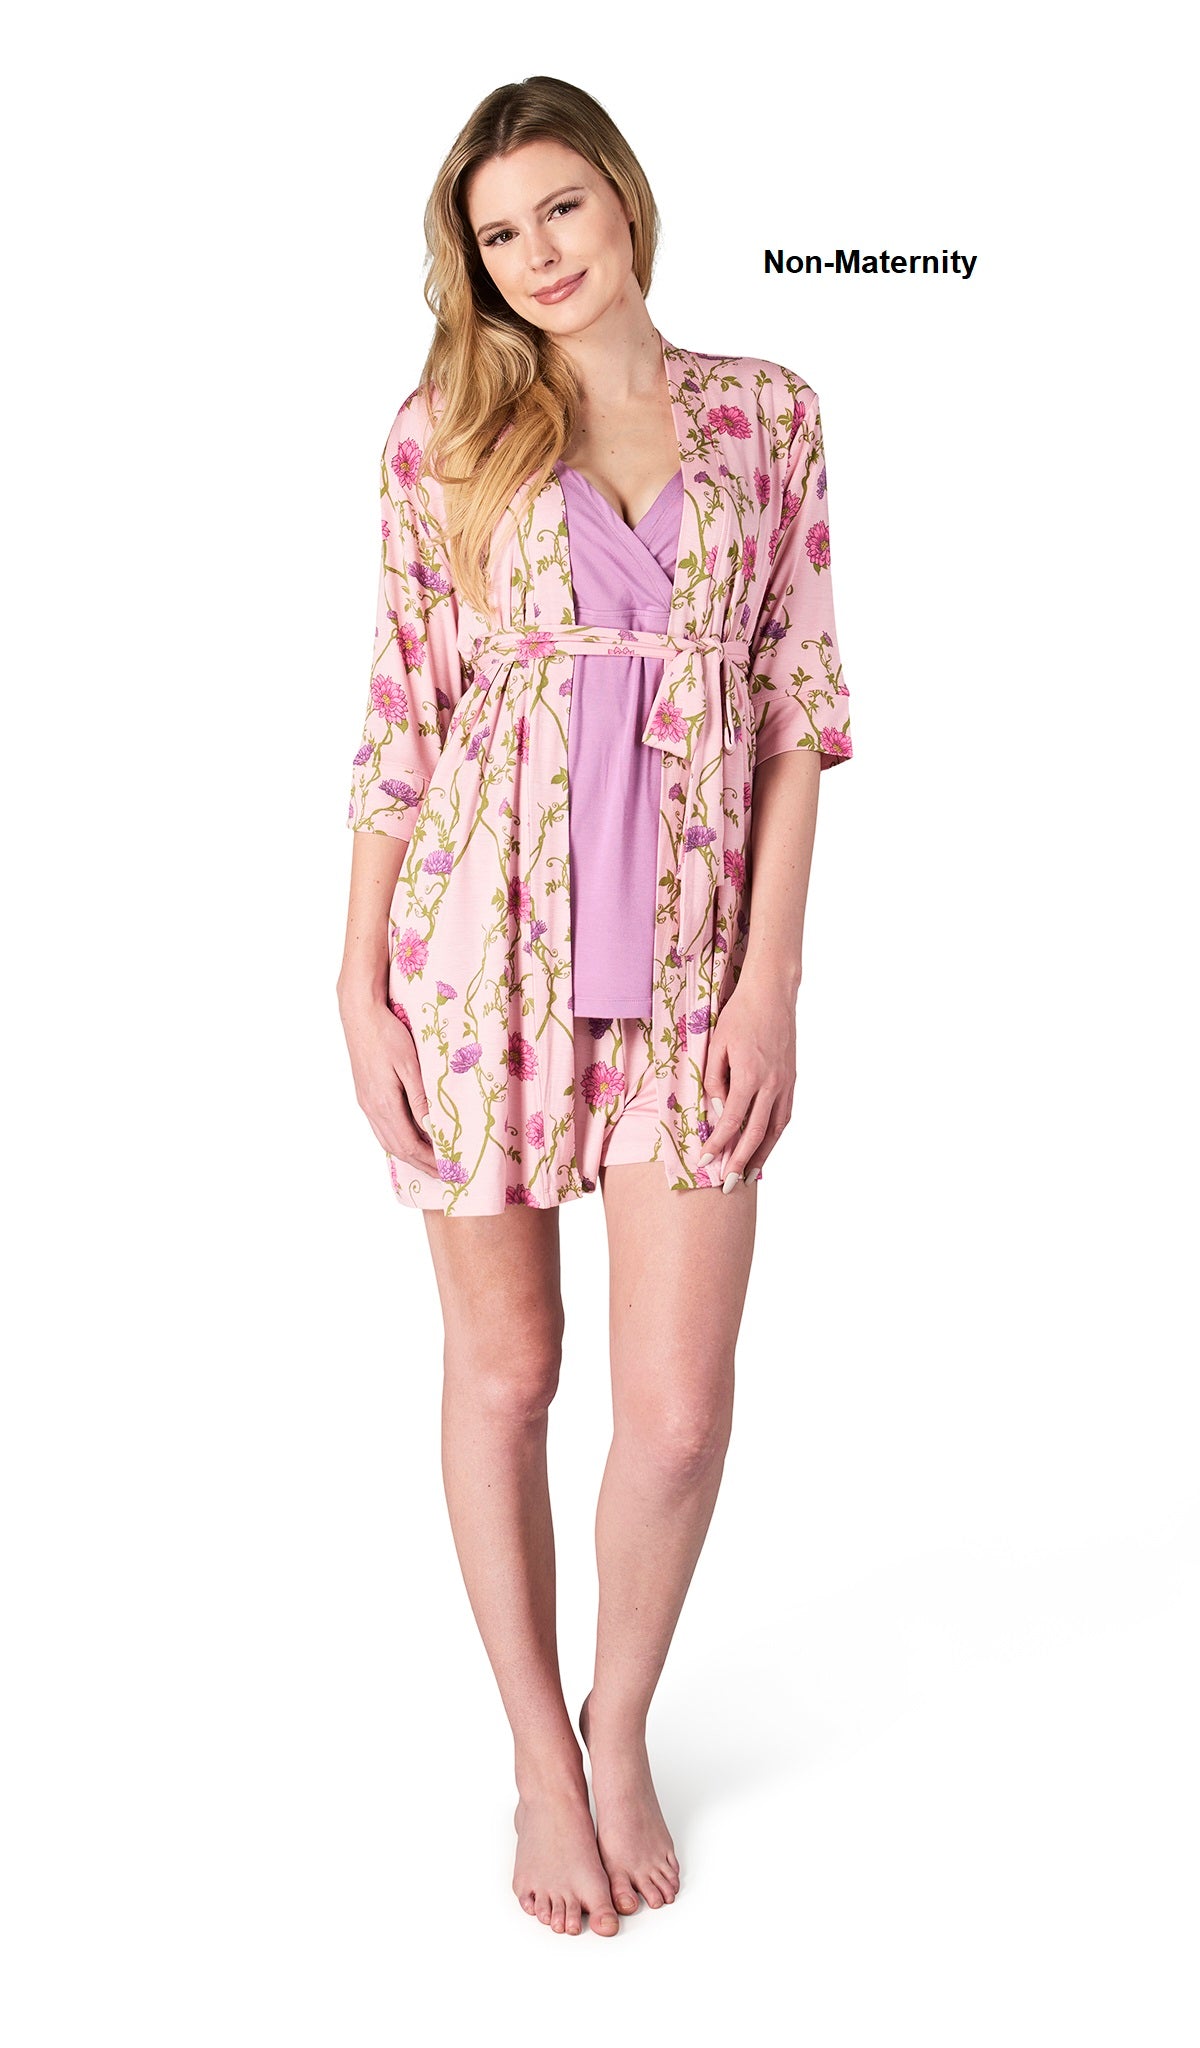 Dahlia Adaline 3-Piece Set. Woman wearing 3/4 sleeve robe, tank top and short as non-maternity.